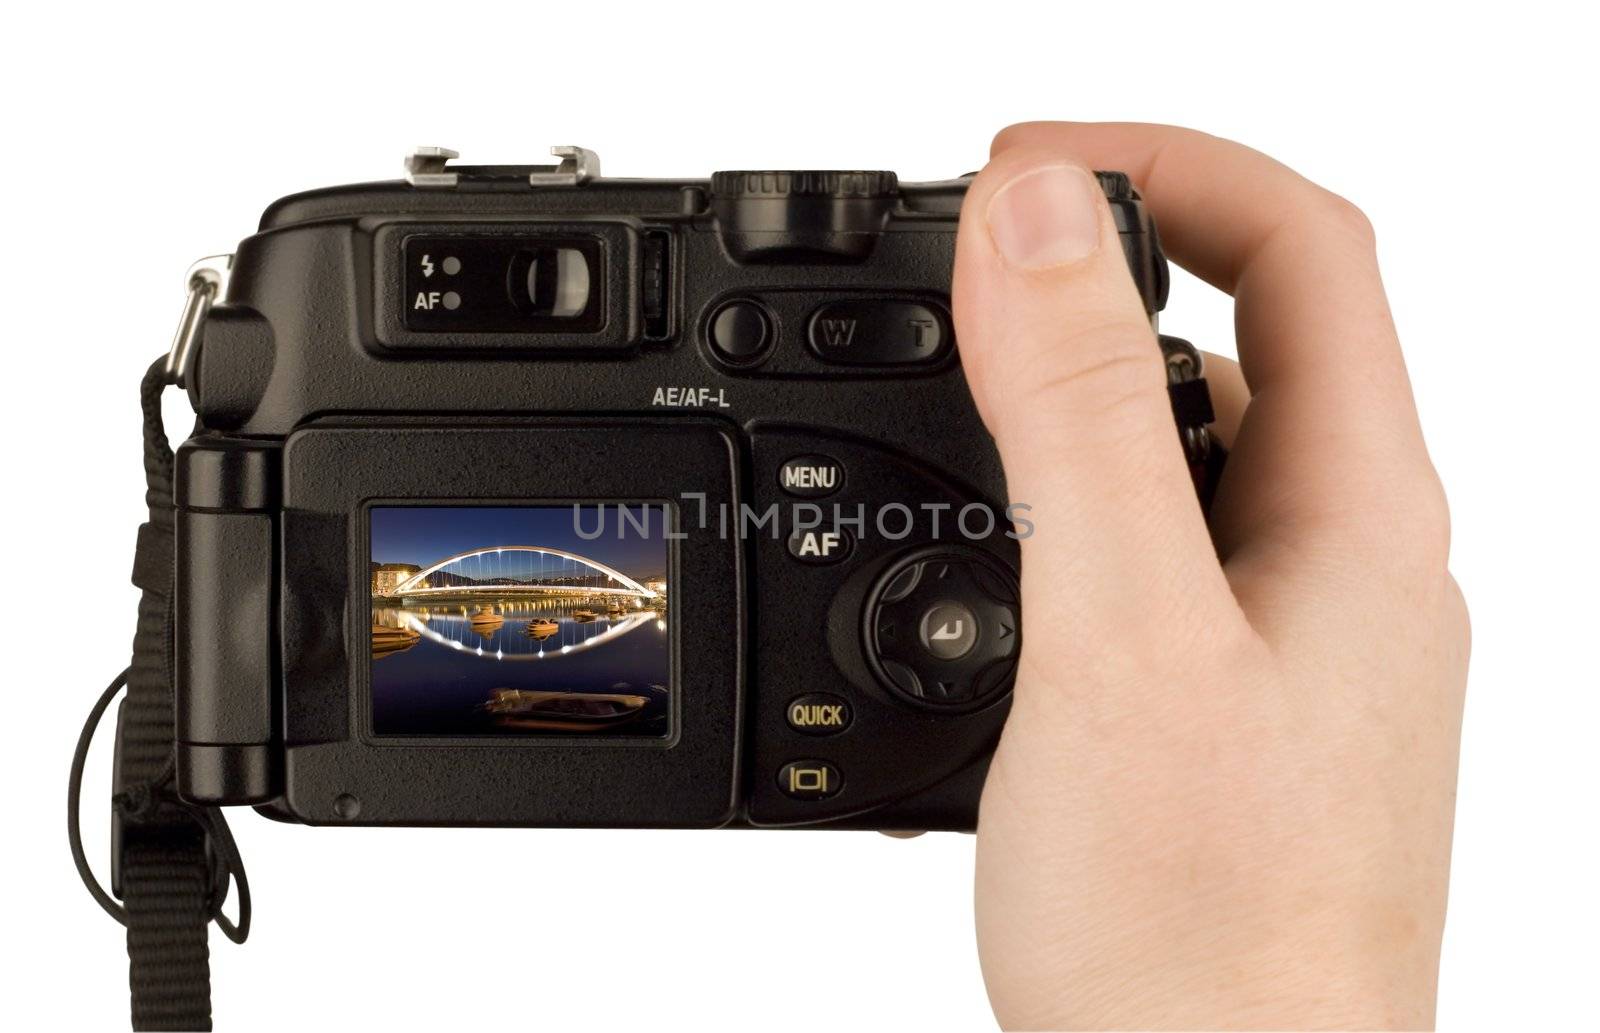 Digital Camera photo in a hand isolated on withe background. lcd screen and background can be easily edited